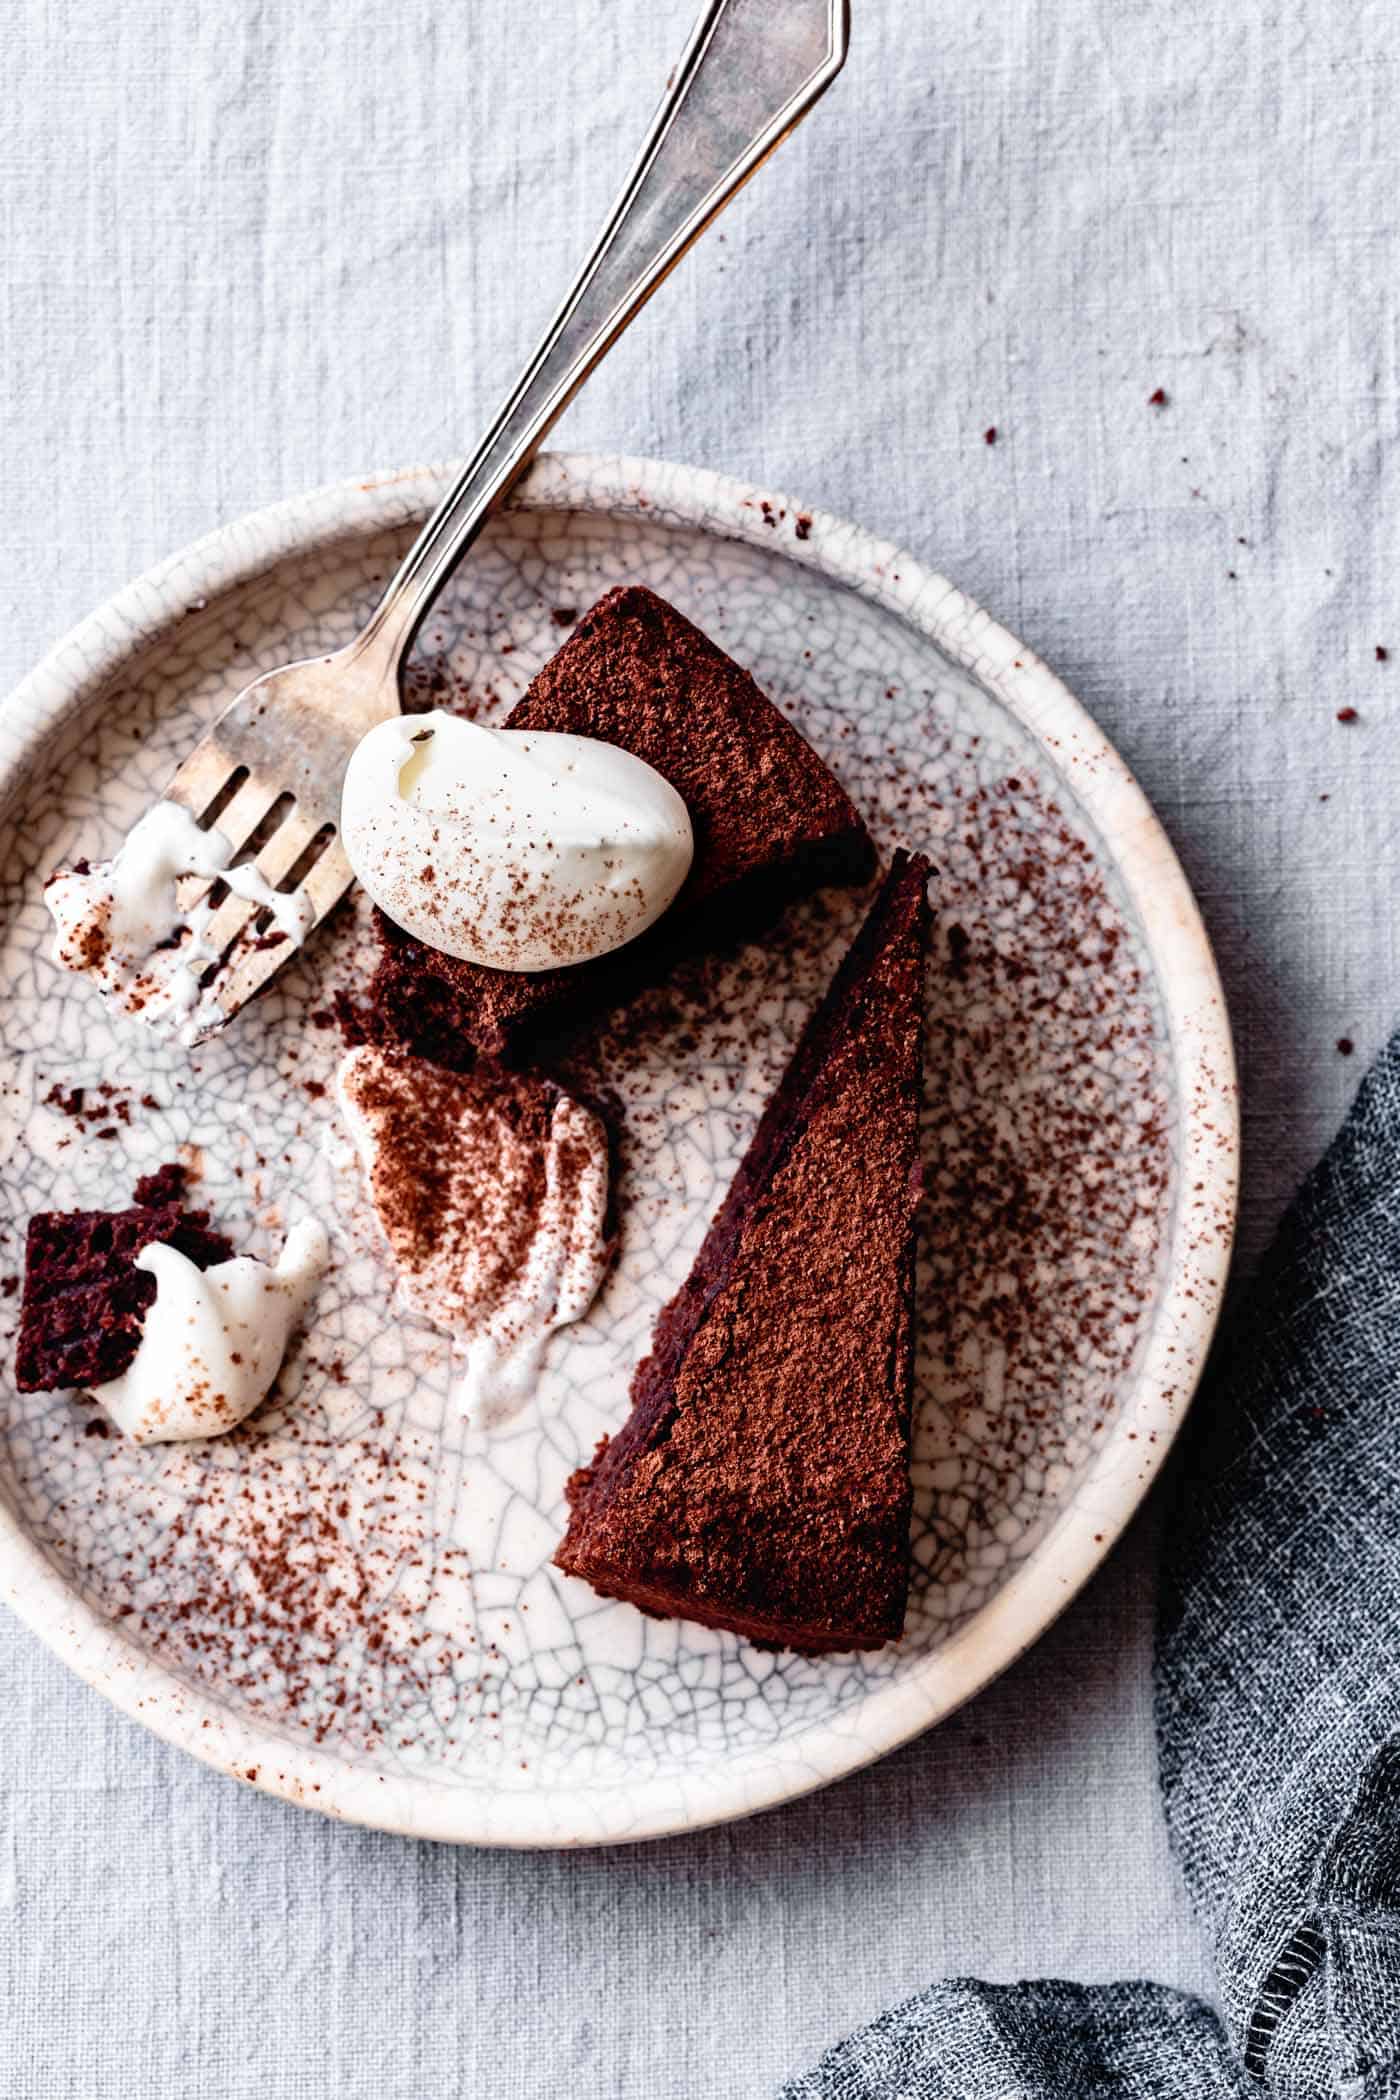 2 slices of chocolate torte on a crackled plate, messy with whipped cream and cocoa and a fork